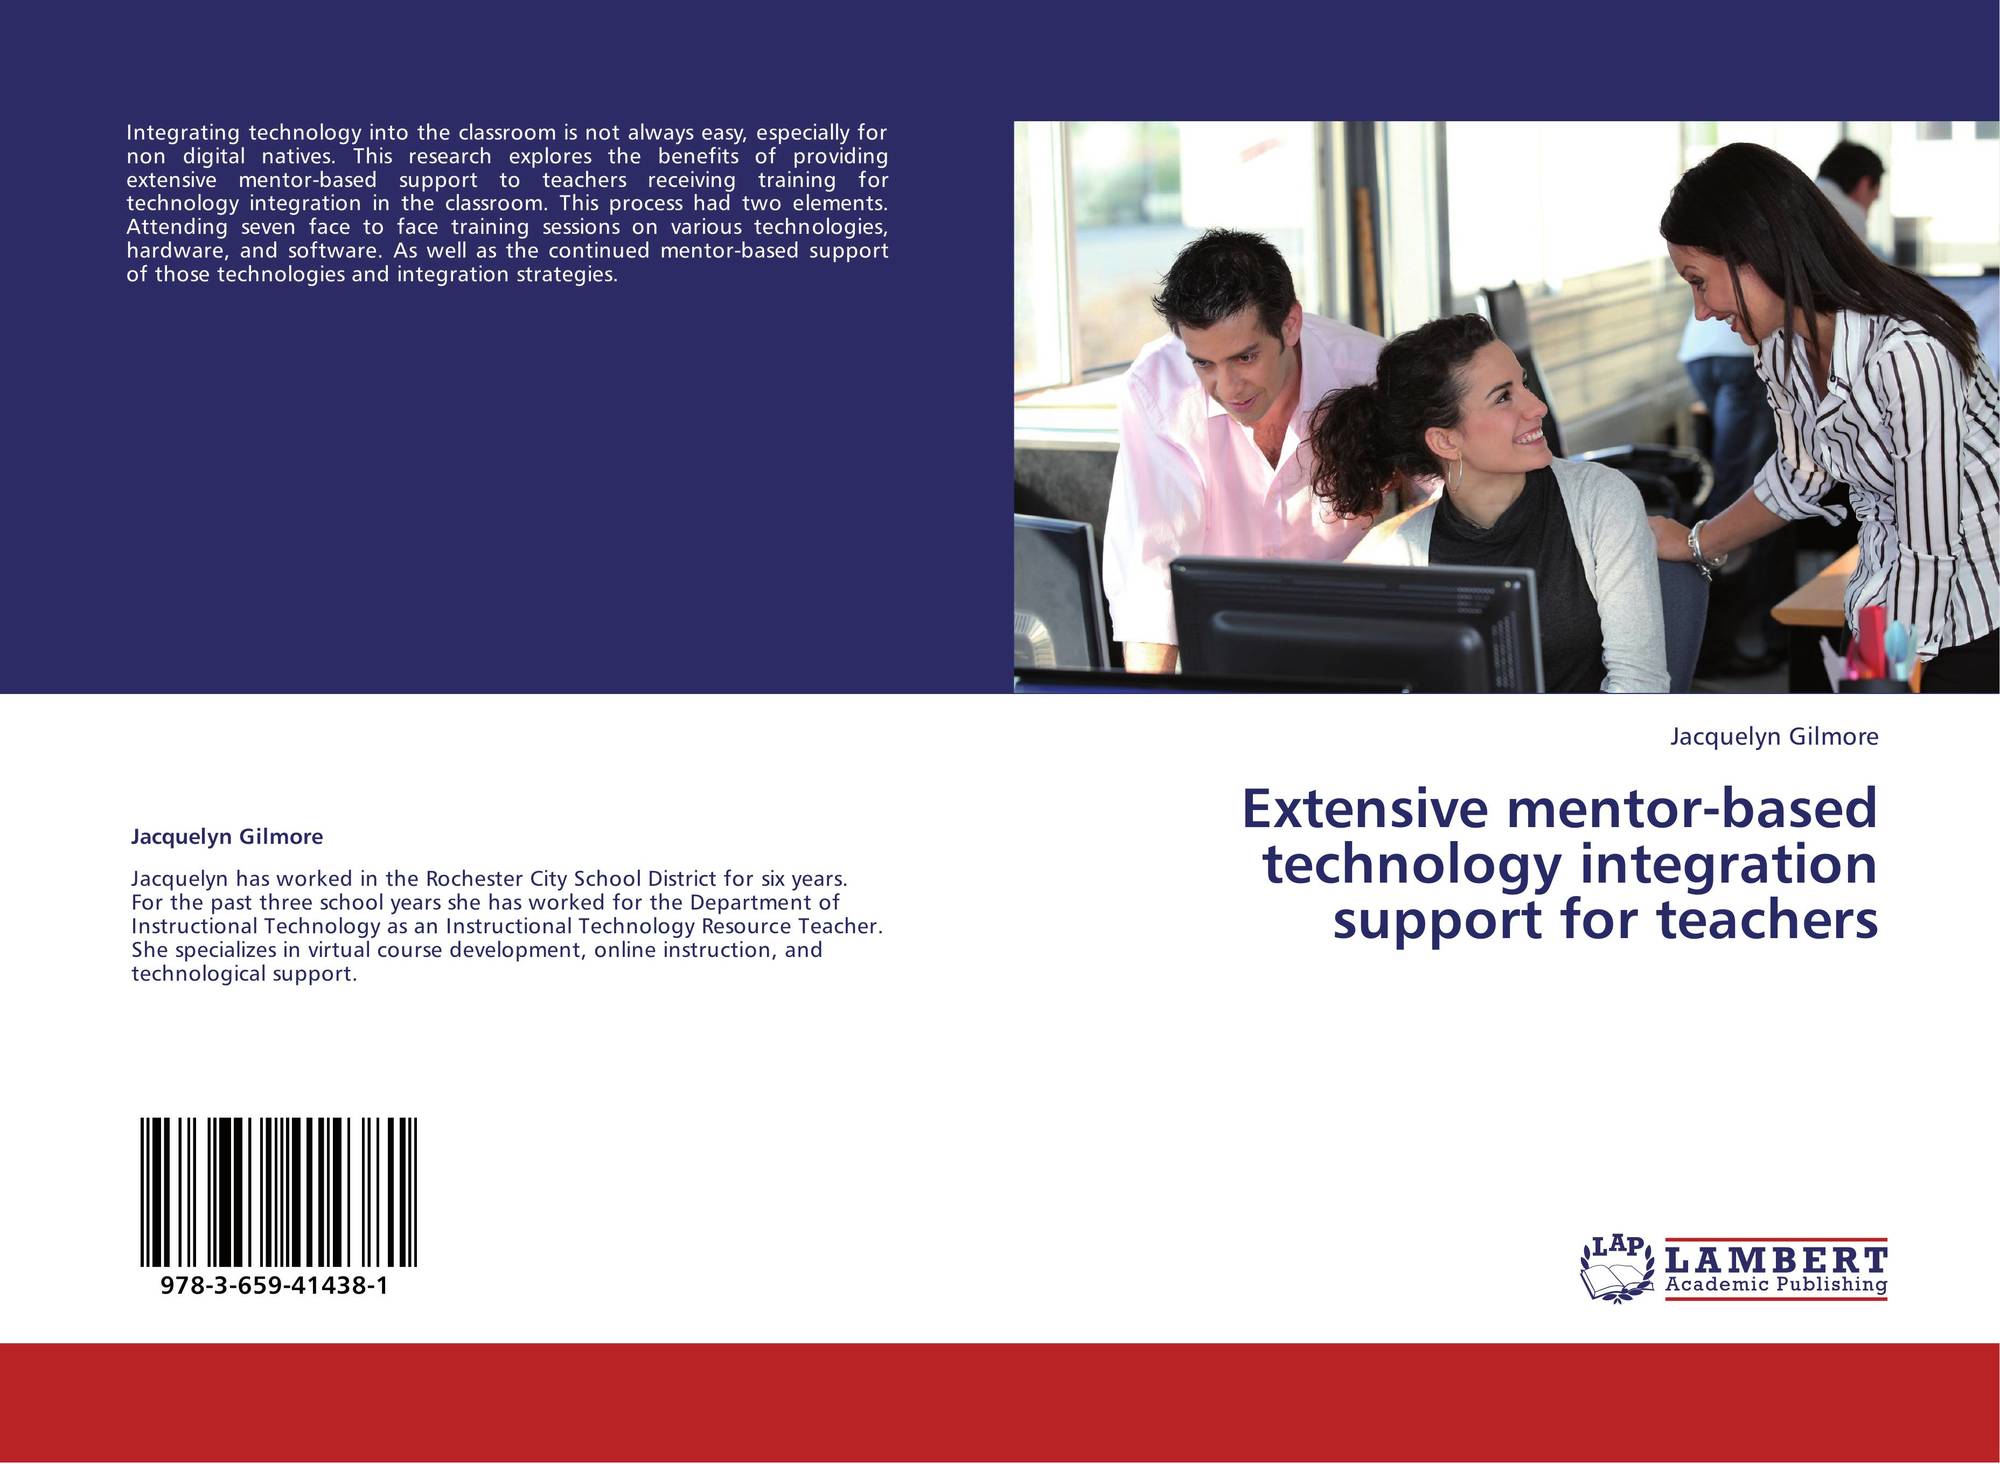 Extensive mentor-based technology integration support for teachers, ,9783659414381 by Jacquelyn